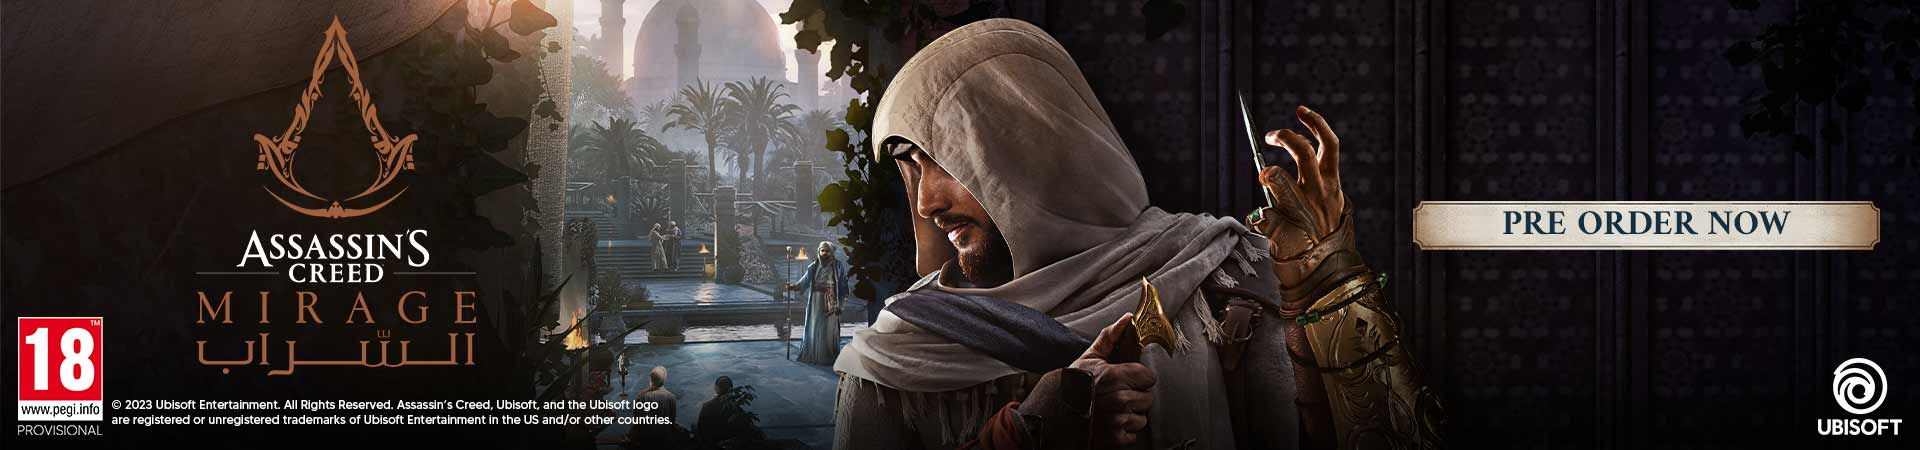 Assassin's Creed Mirage - PreOrder Now